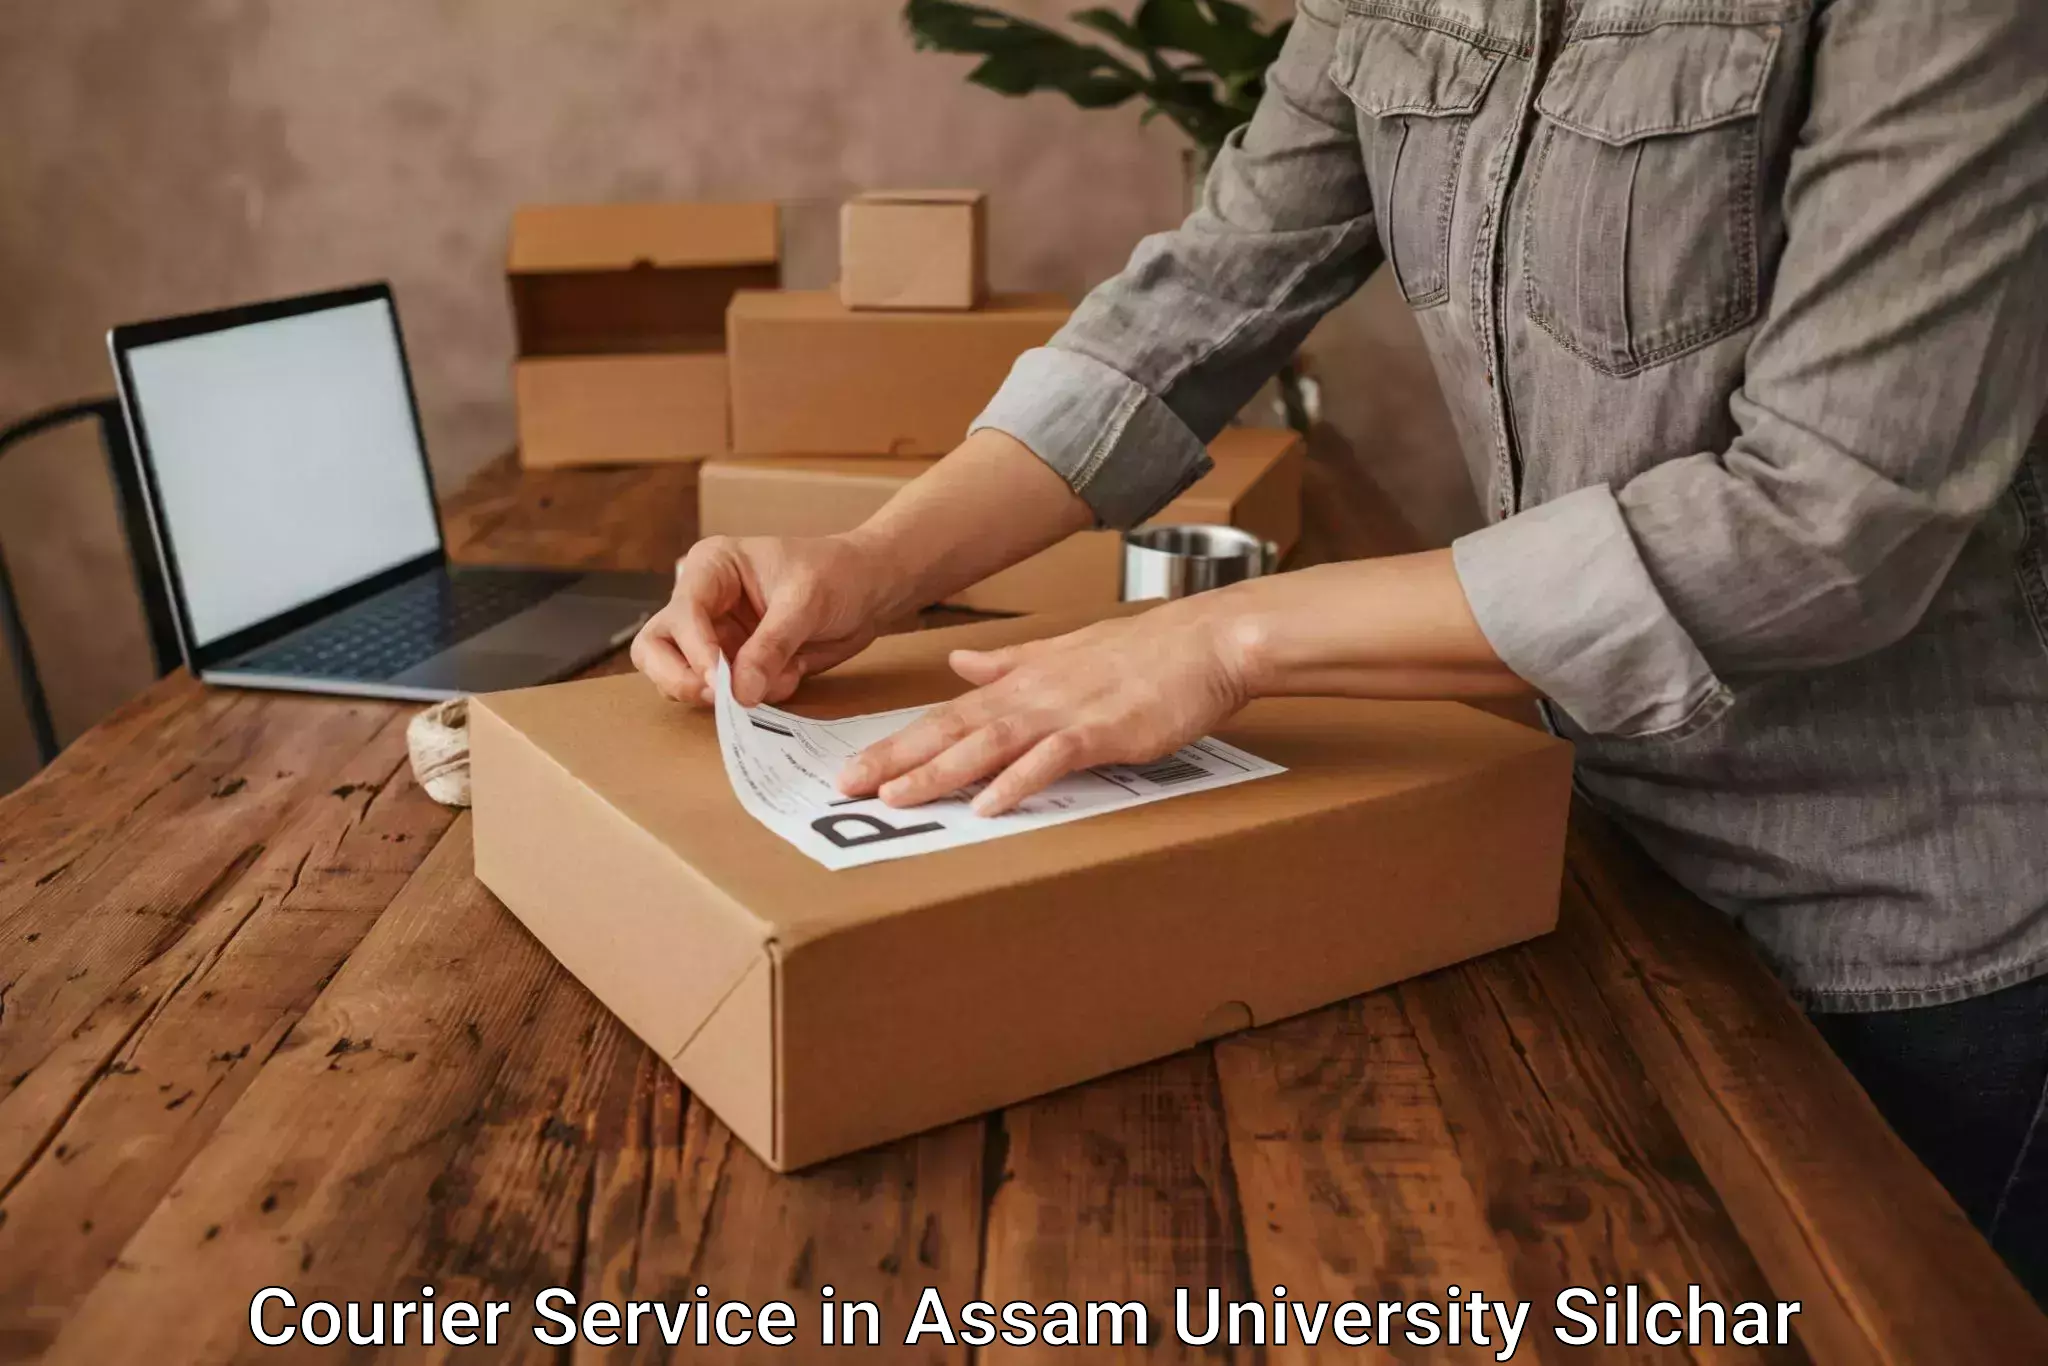 Courier service booking in Assam University Silchar